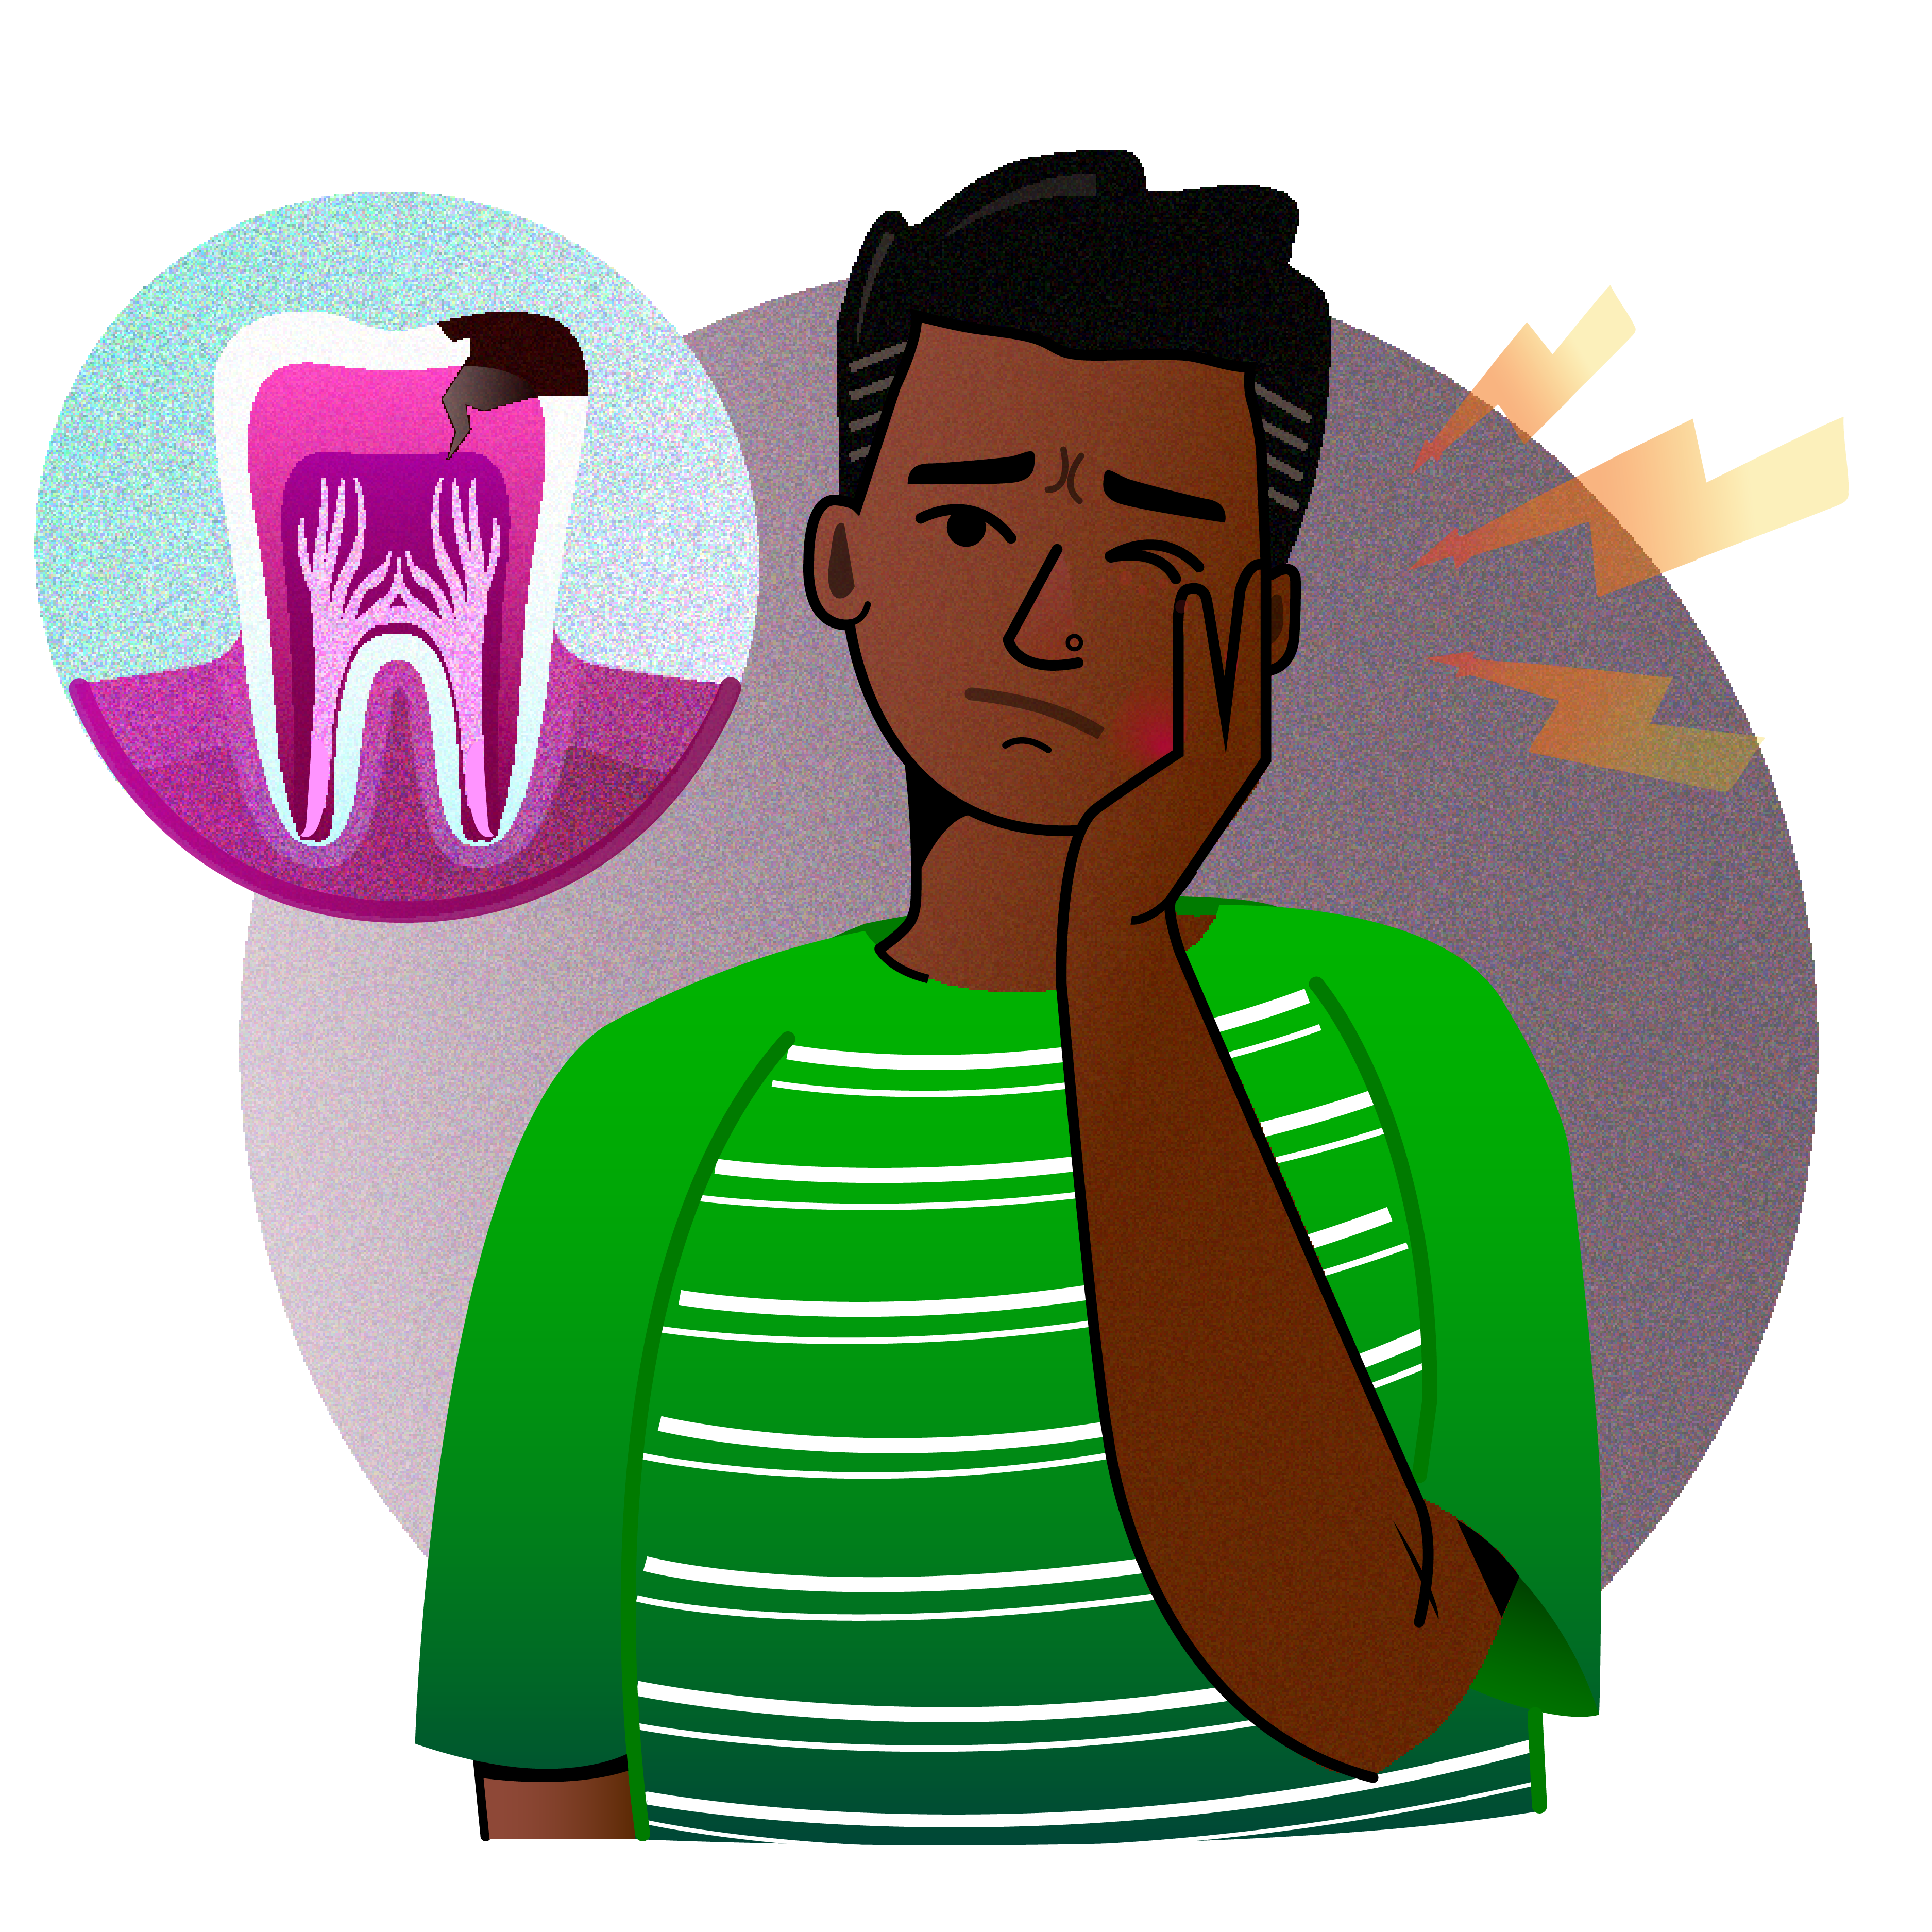 Illustration of a young man with tooth pain. A cutaway image shows a tooth with a dark spot of tooth decay